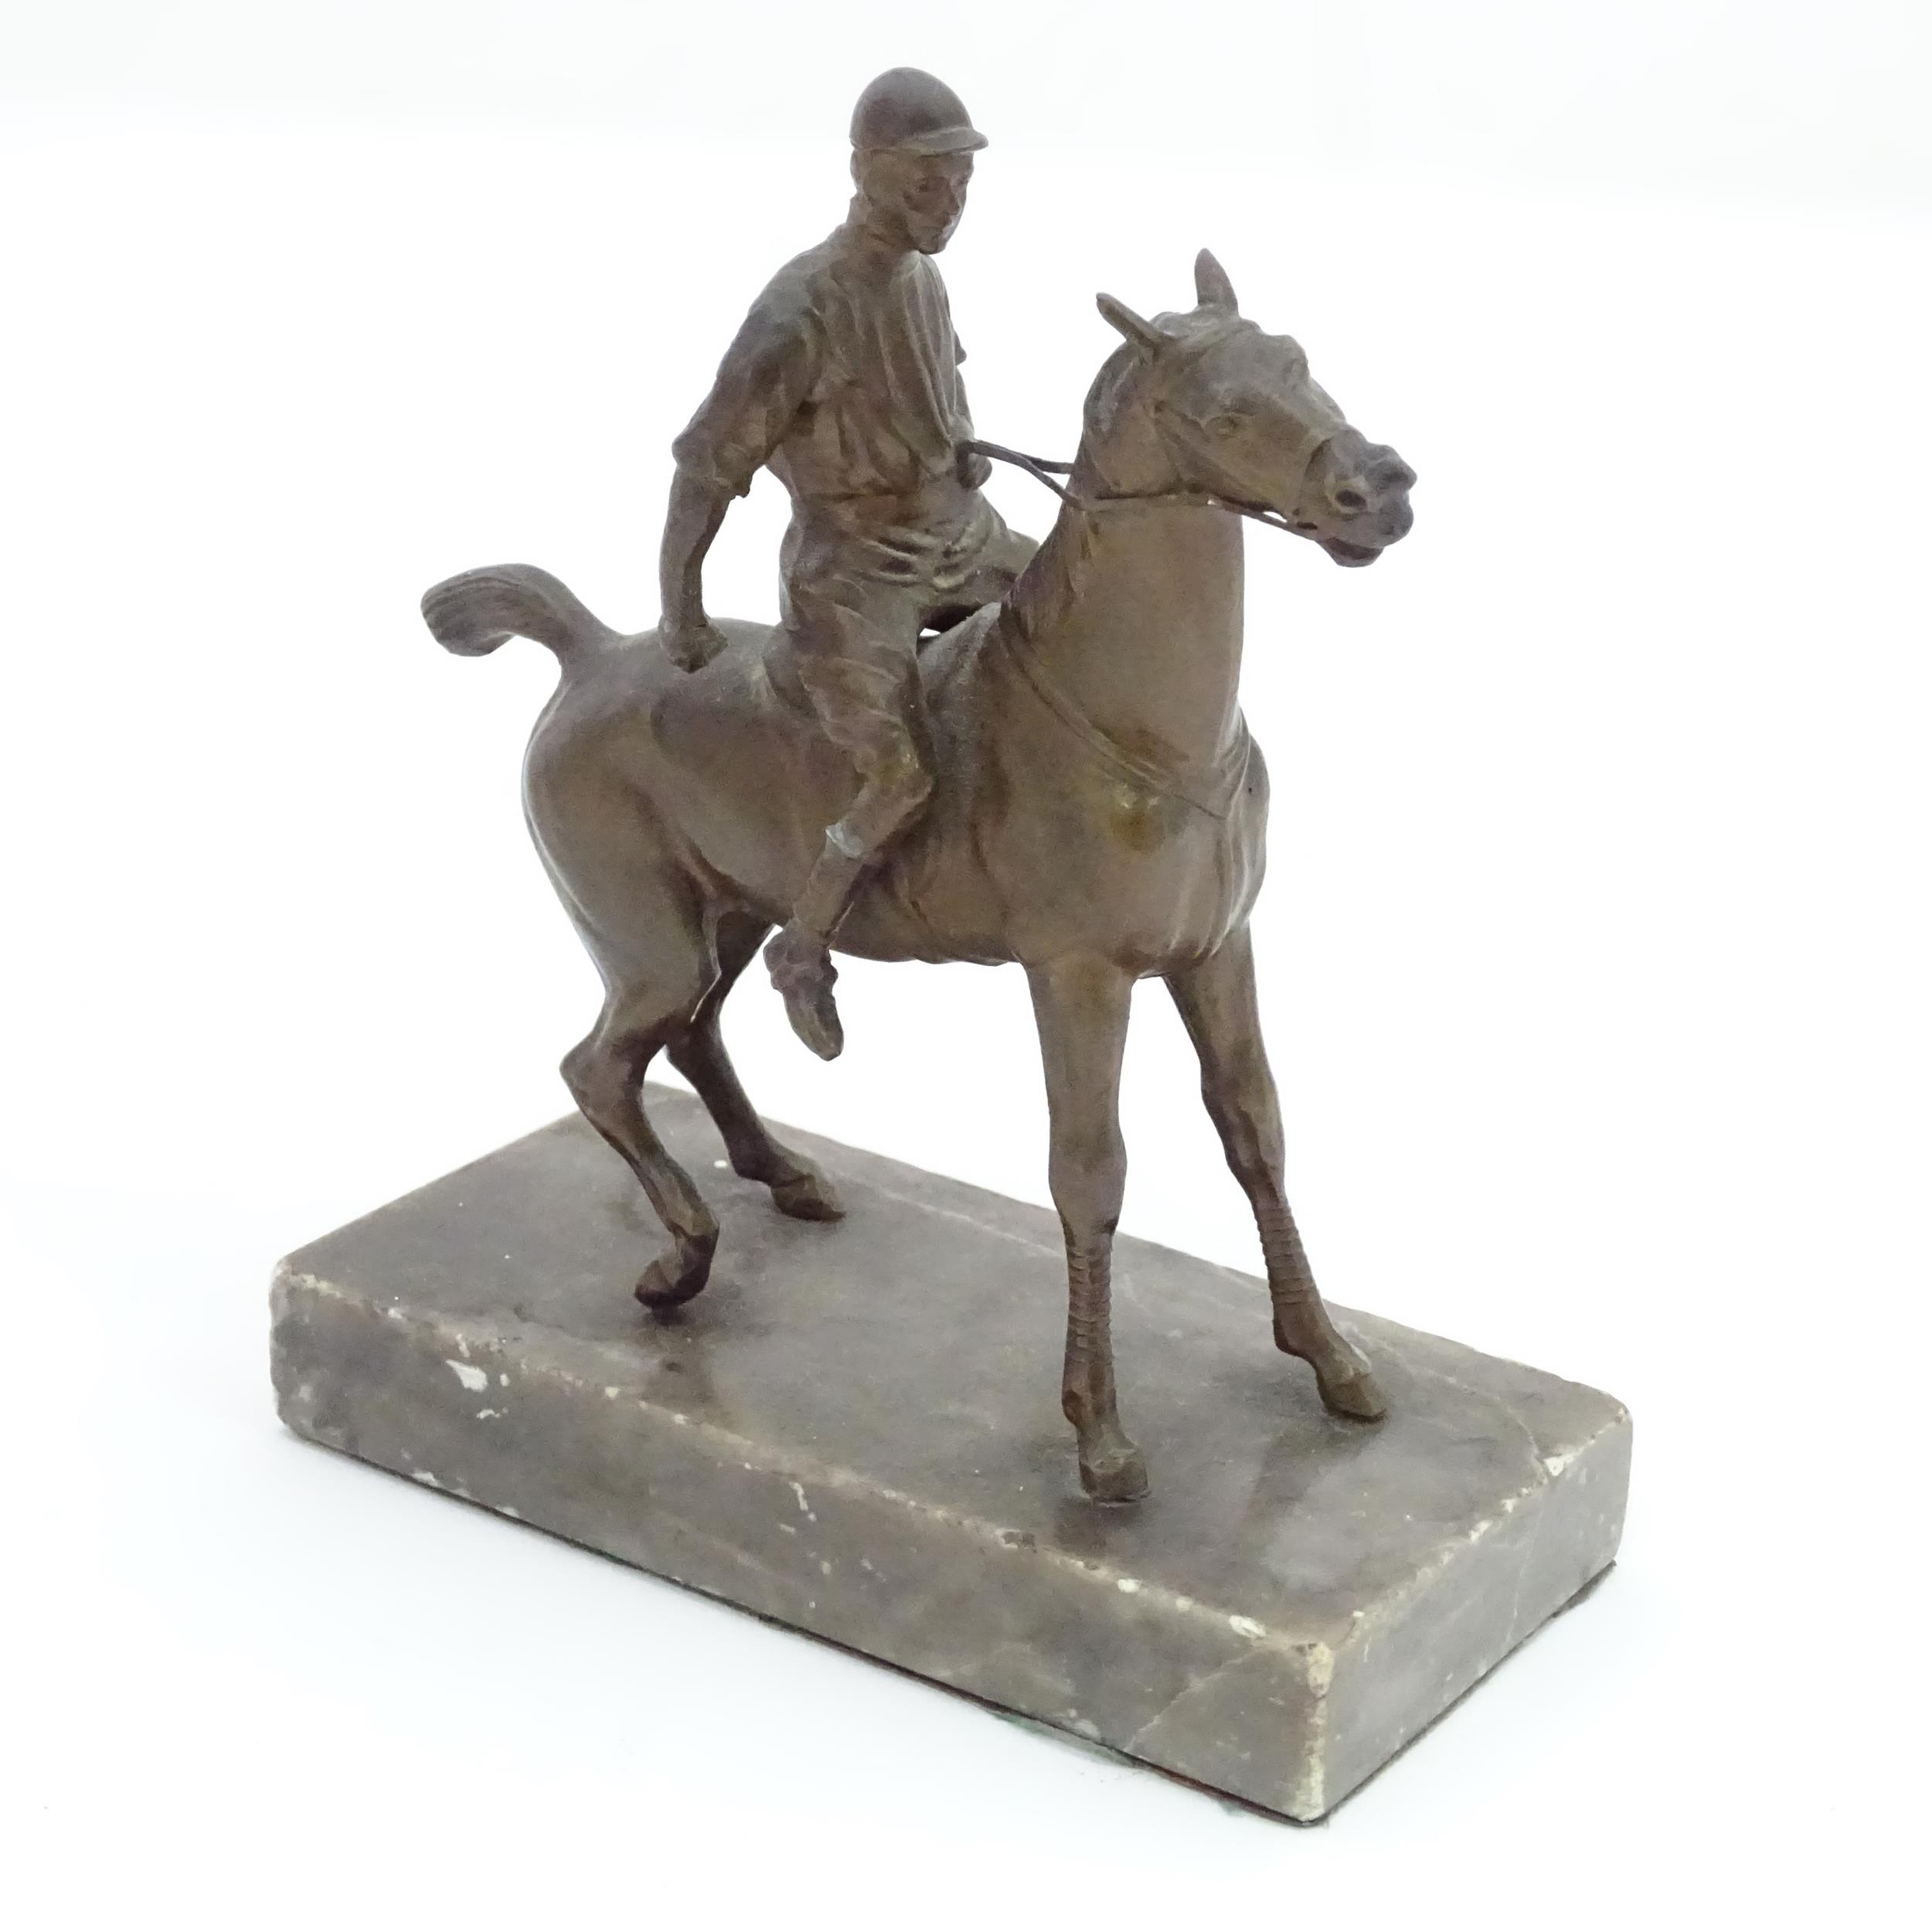 A 20thC cast sculpture modelled as a jockey on horseback, upon a marble base. Approx. 5 1/2" high